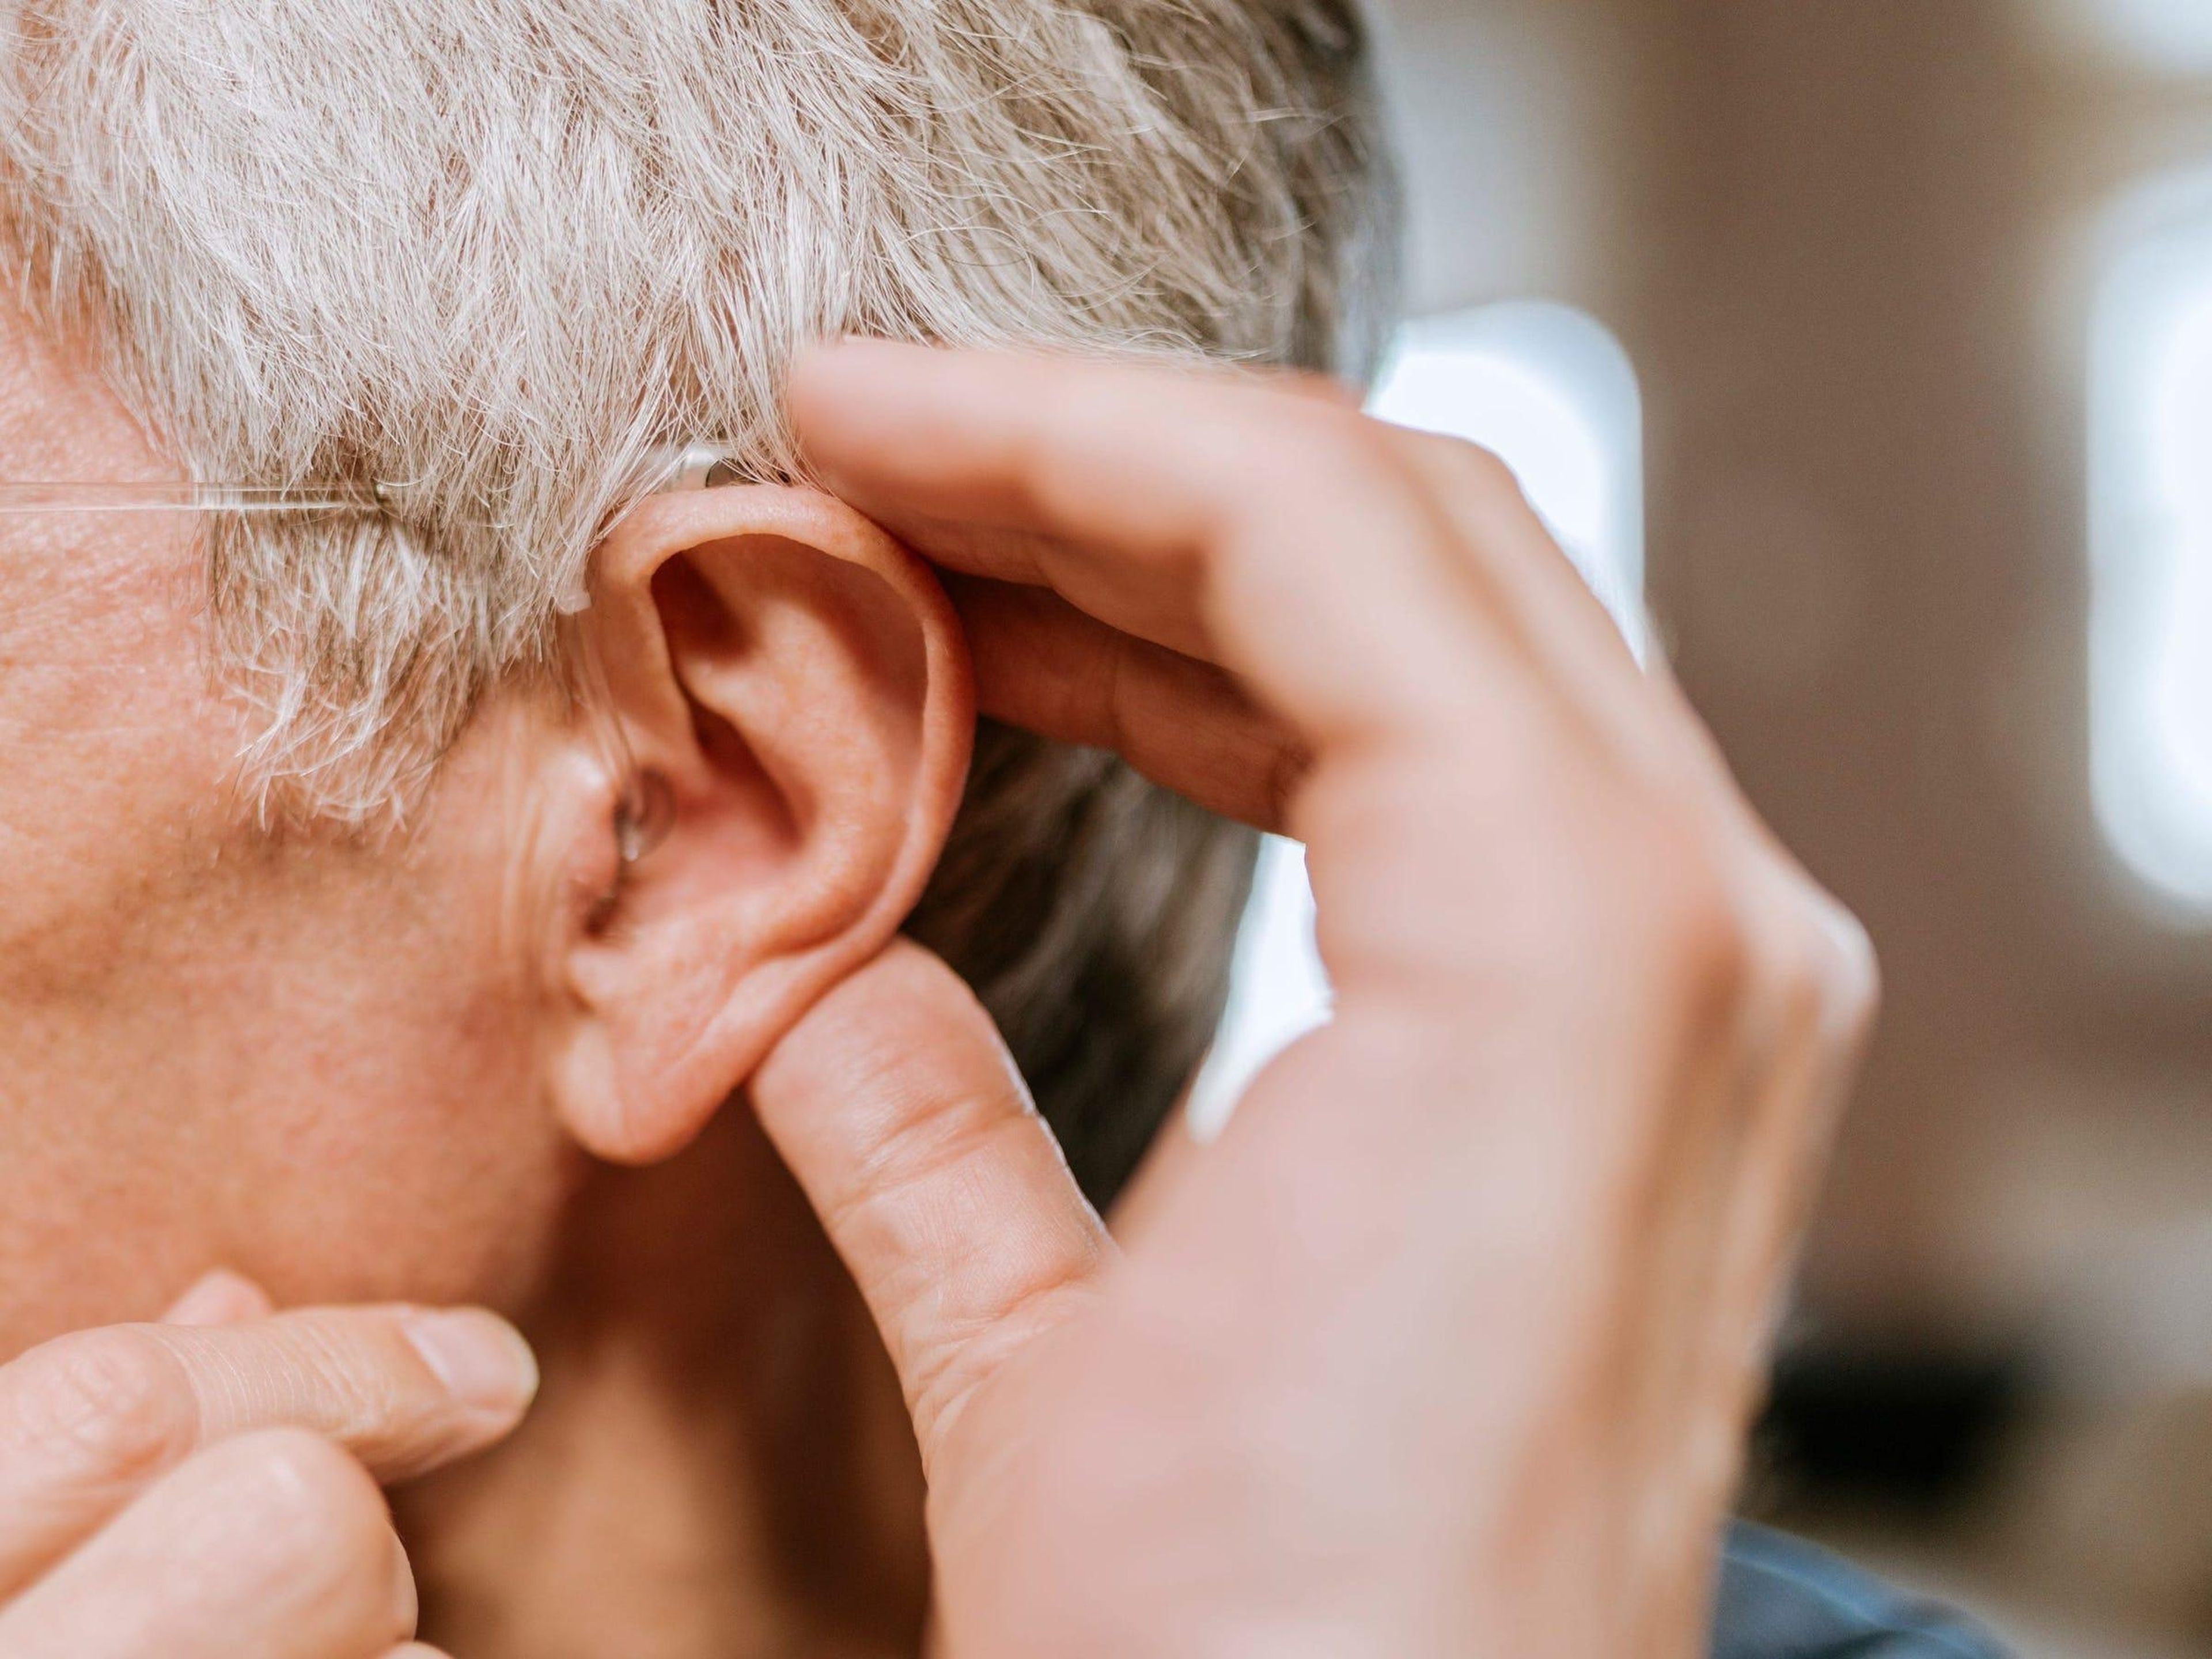 A 45-year-old COVID-19 patient in the UK now has permanent hearing loss